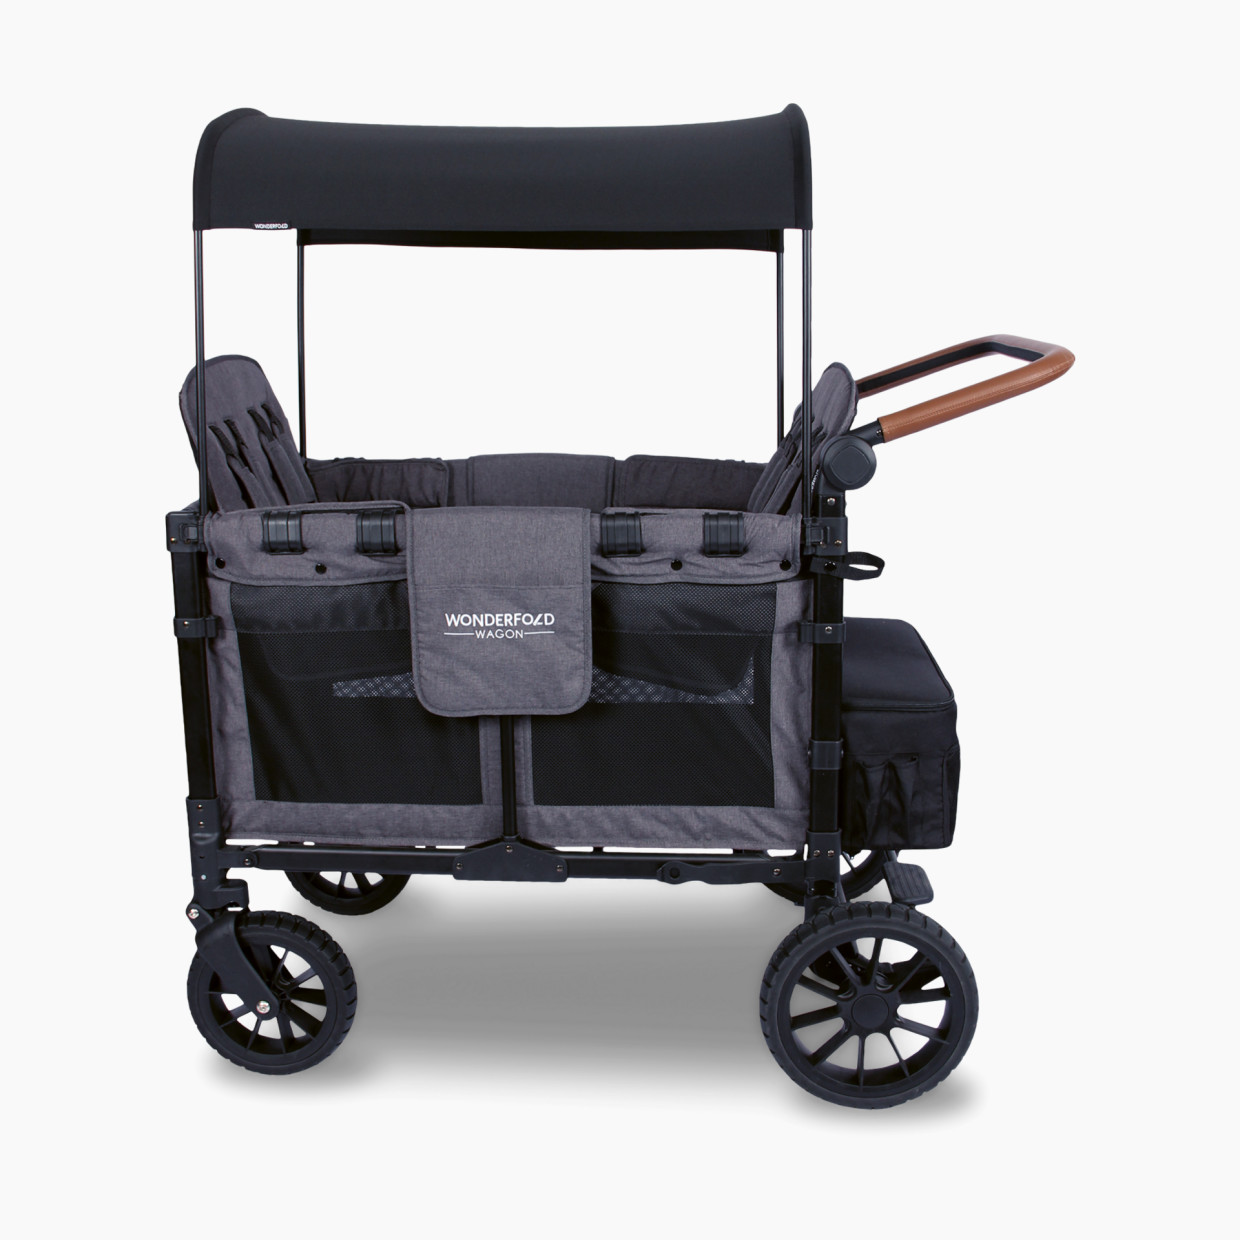 WonderFold Wagon W4 Luxe Quad Stroller Wagon (4 Seater) - Charcoal Gray/Black Frame.